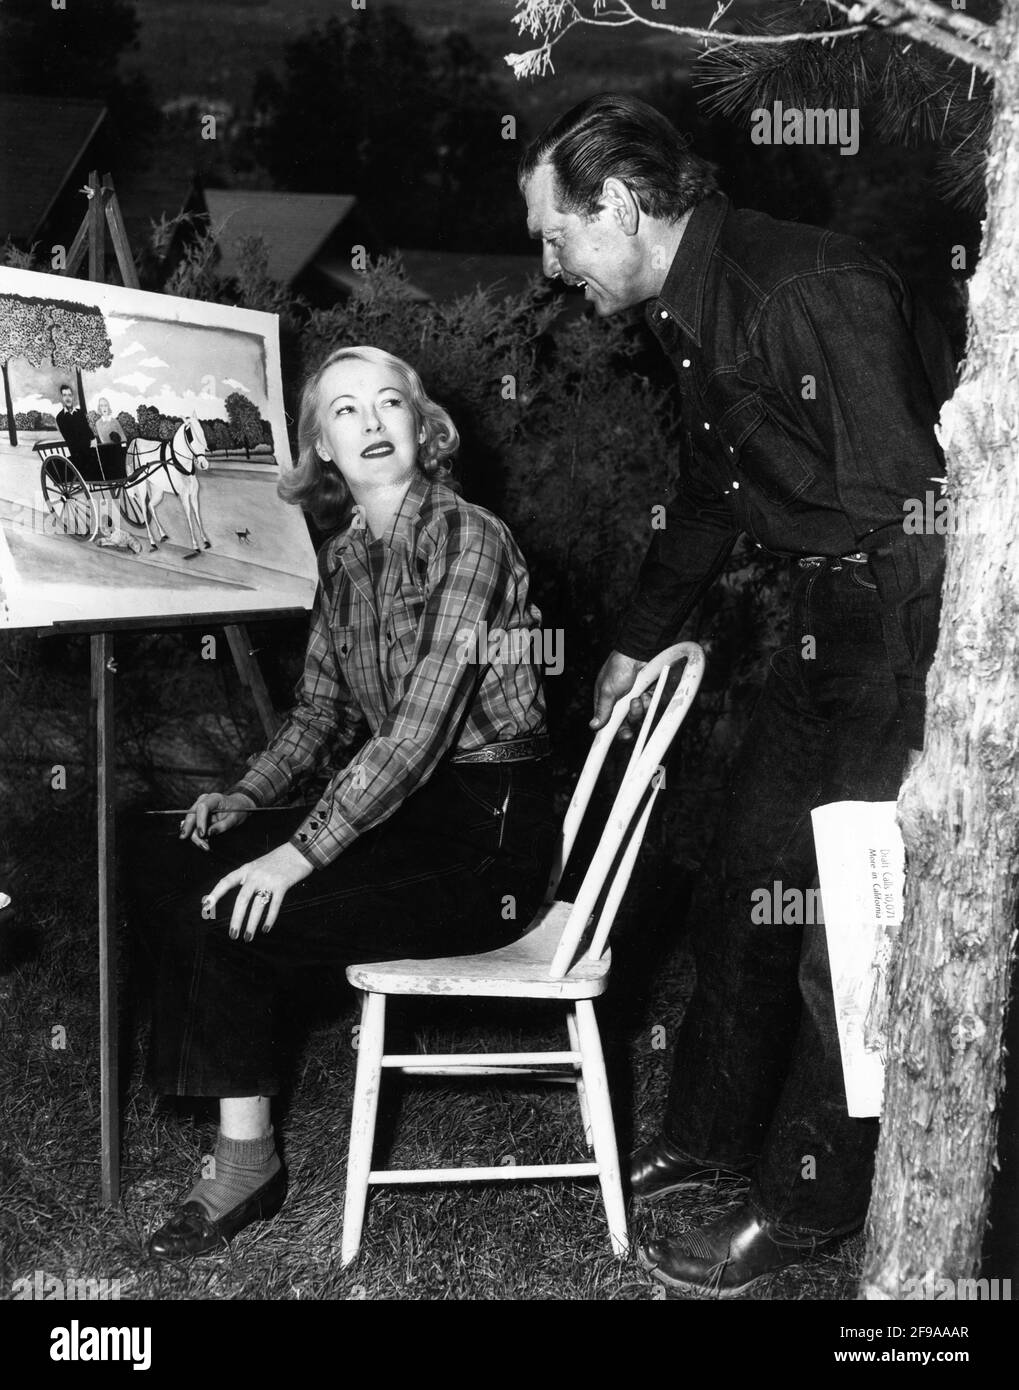 CLARK GABLE and his 4th Wife SYLVIA ASHLEY on location candid in Colorado during filming of ACROSS THE WIDE MISSOURI 1951 director WILLIAM A. WELLMAN screenplay Talbot Jennings book Bernard DeVoto Metro Goldwyn Mayer Stock Photo